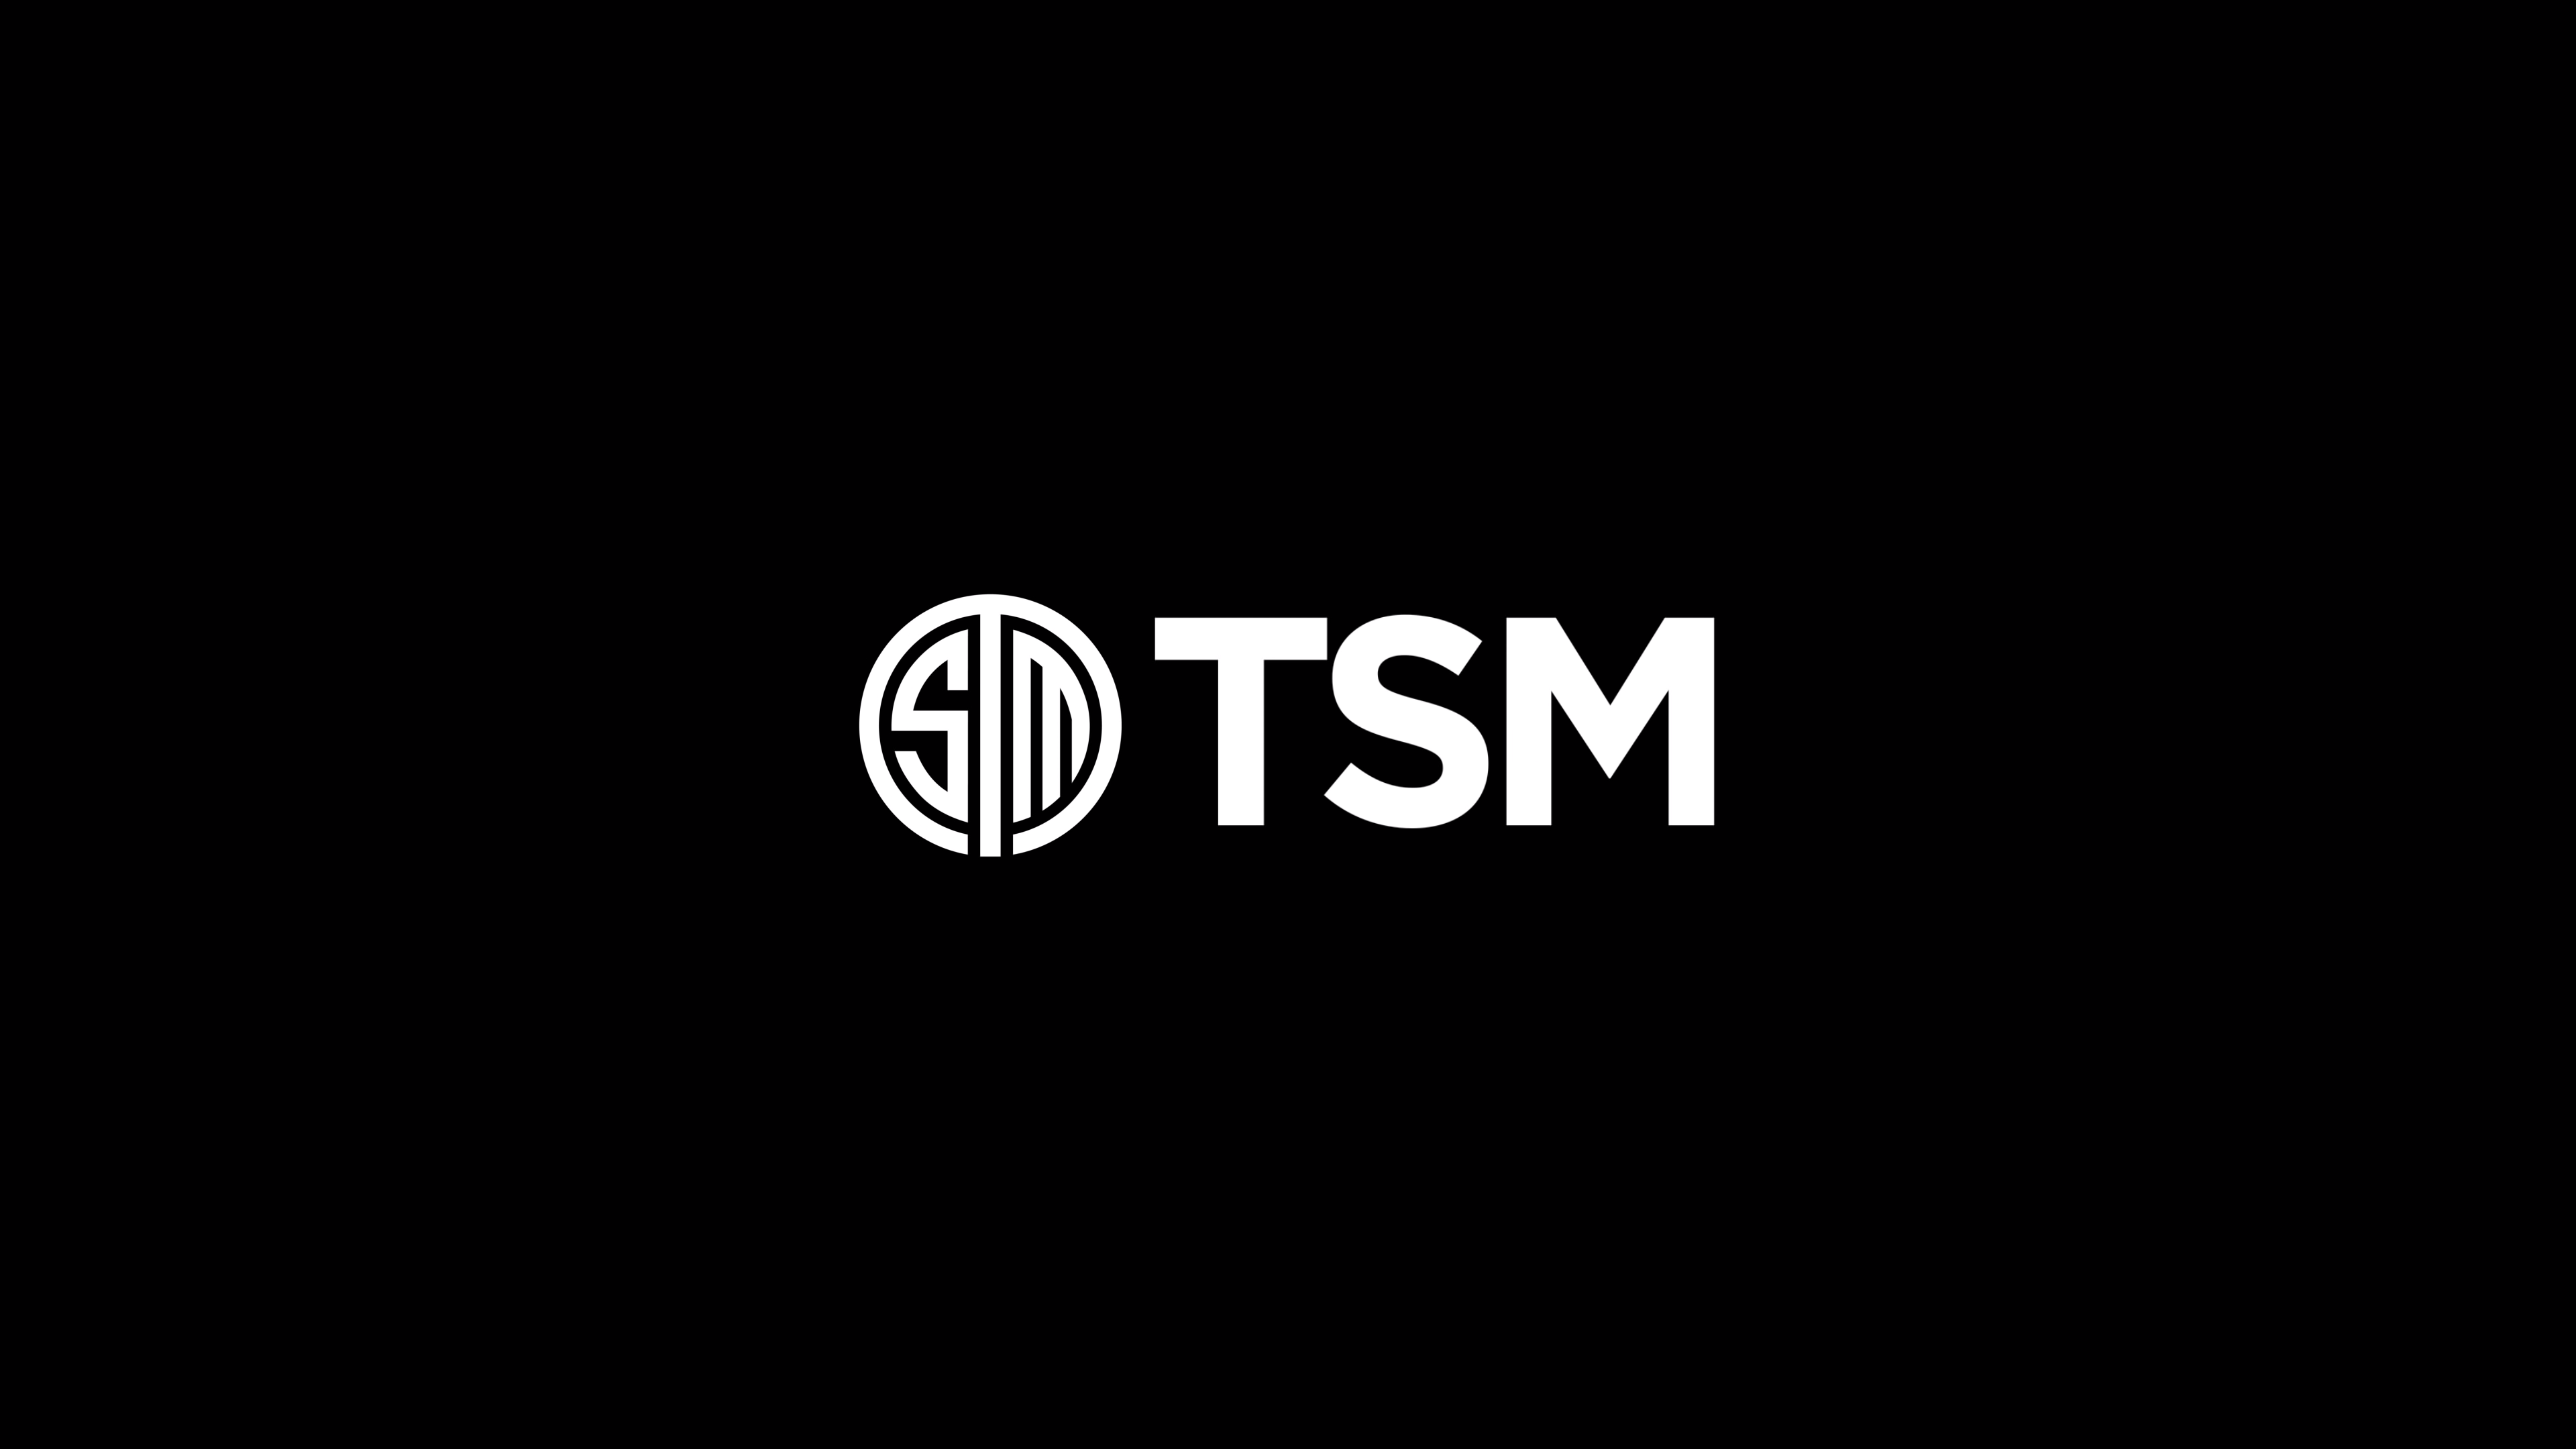 Team SoloMid Allowed Substitute Support Treatz To Explore Opportunities For Upcoming 2021 Season